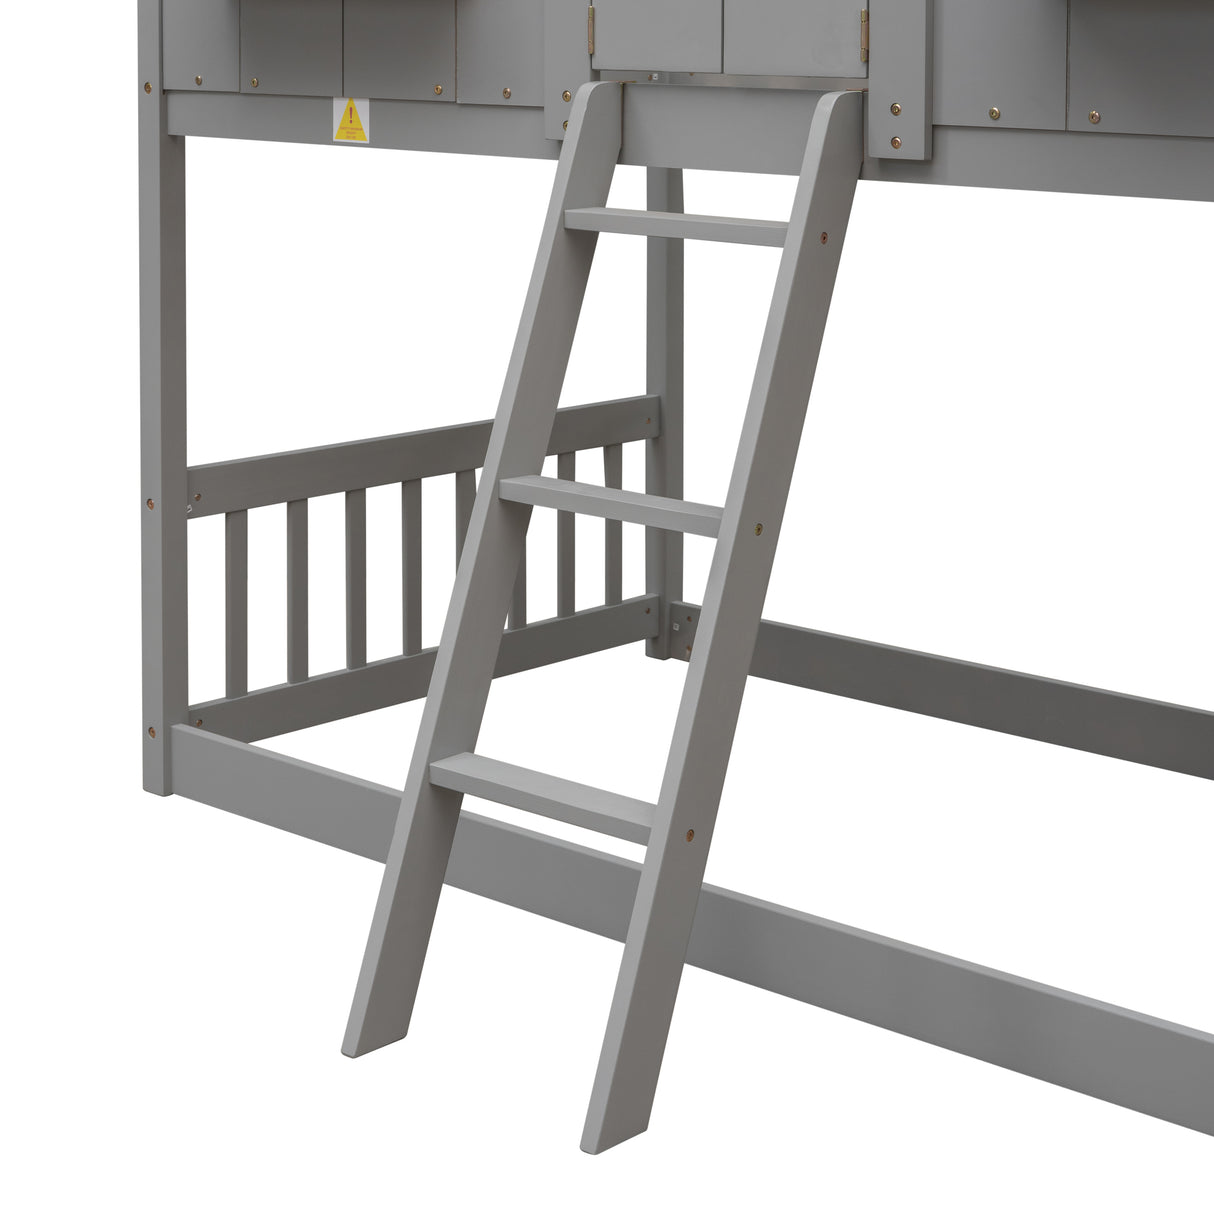 Twin over Twin House Bunk Bed with Roof , Window, Window  Box, Door , with Safety Guardrails and Ladder, Grey - Home Elegance USA